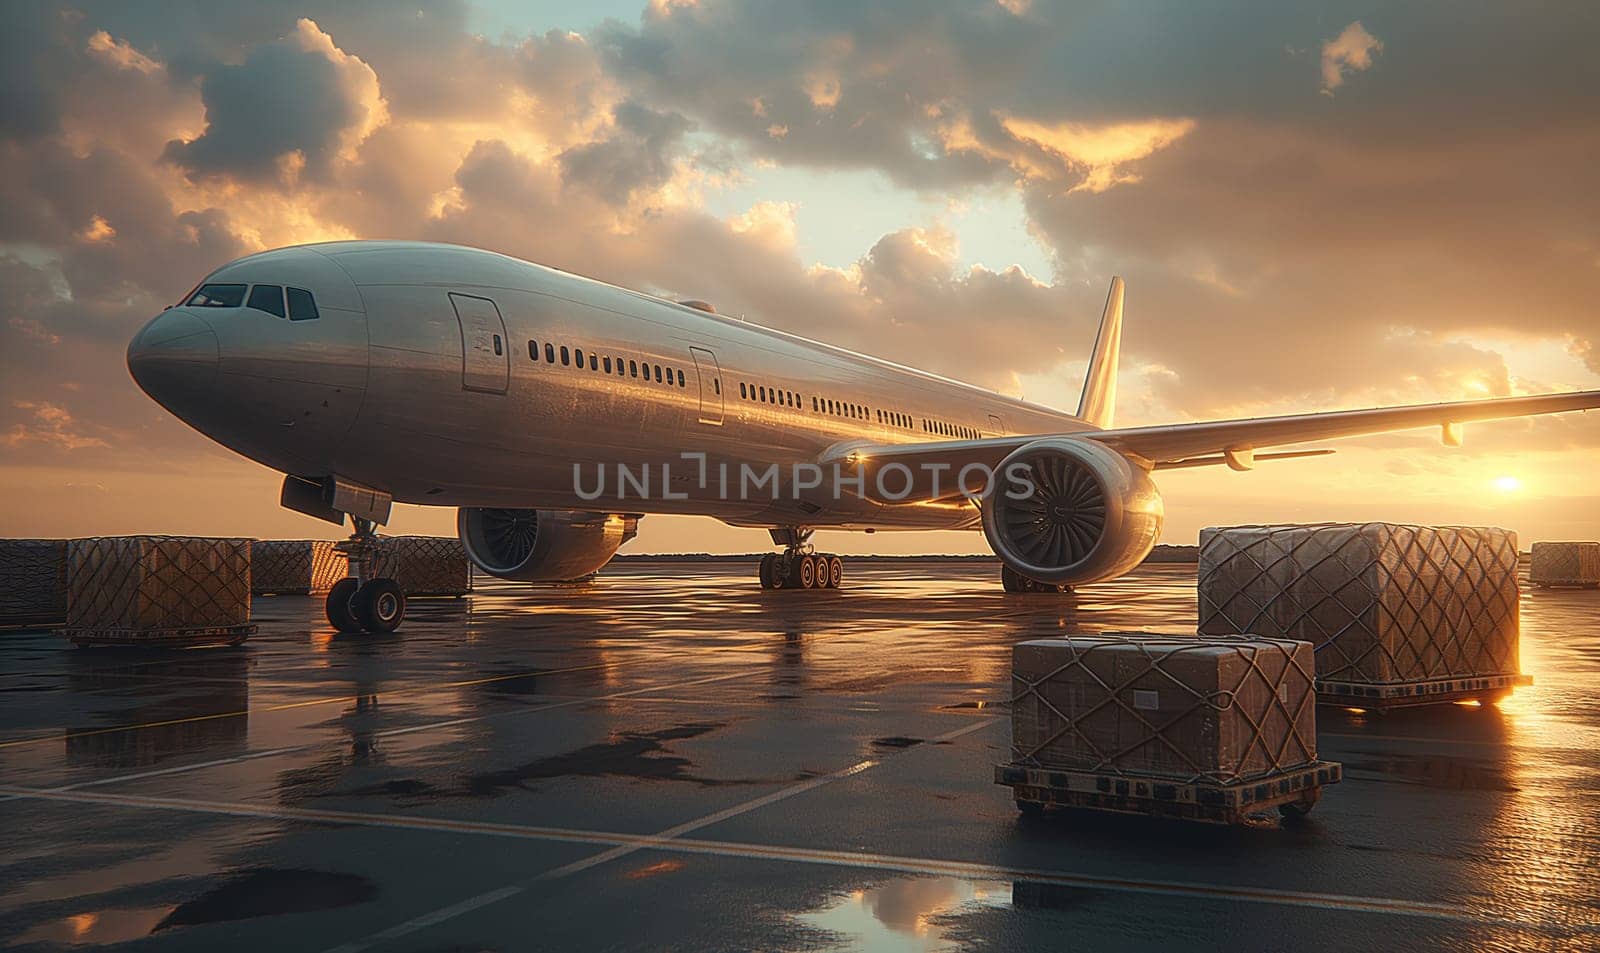 Sunset View of Airplane on Wet Tarmac. by Fischeron